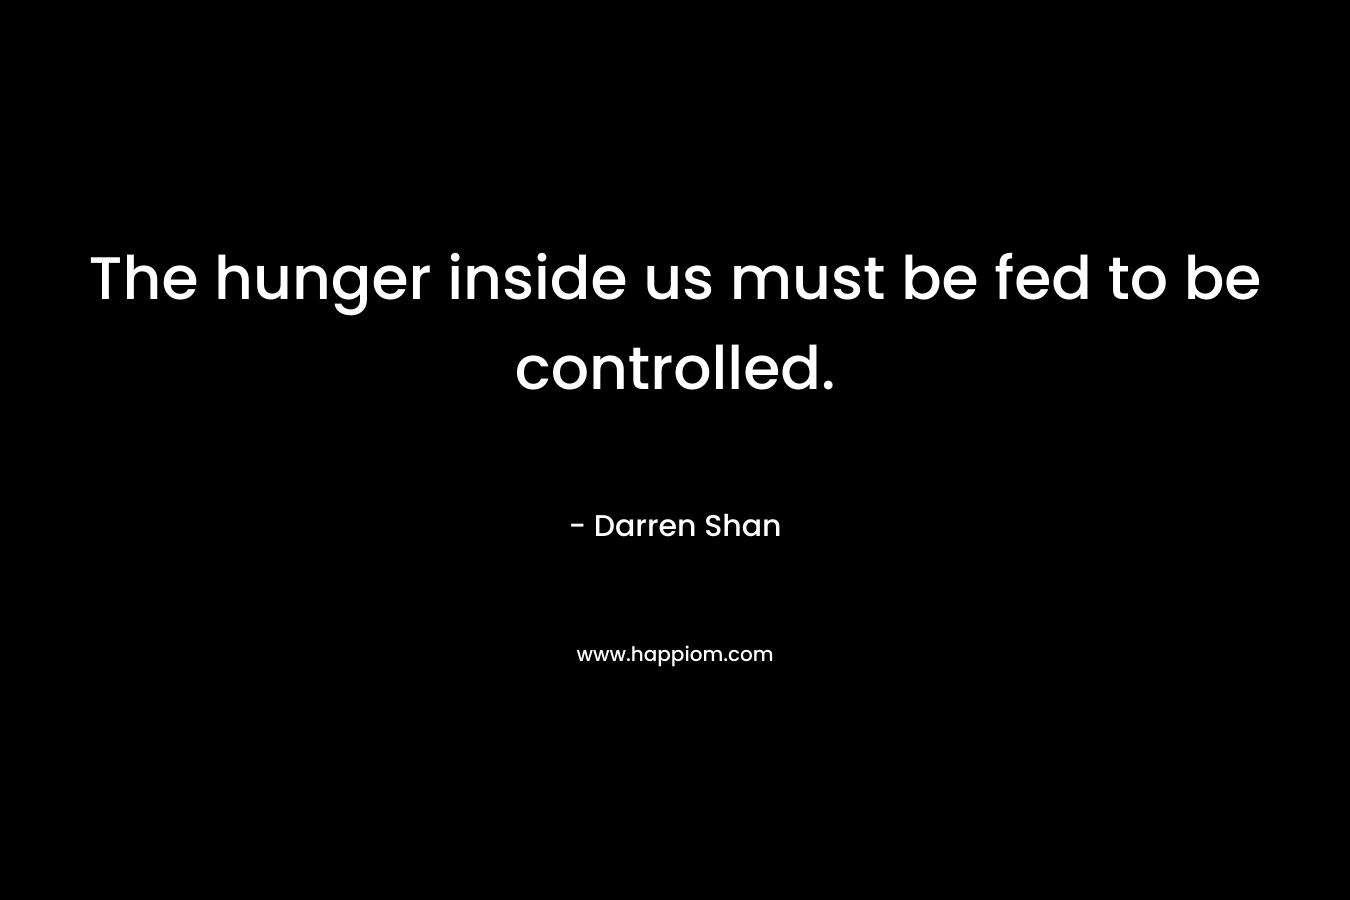 The hunger inside us must be fed to be controlled.